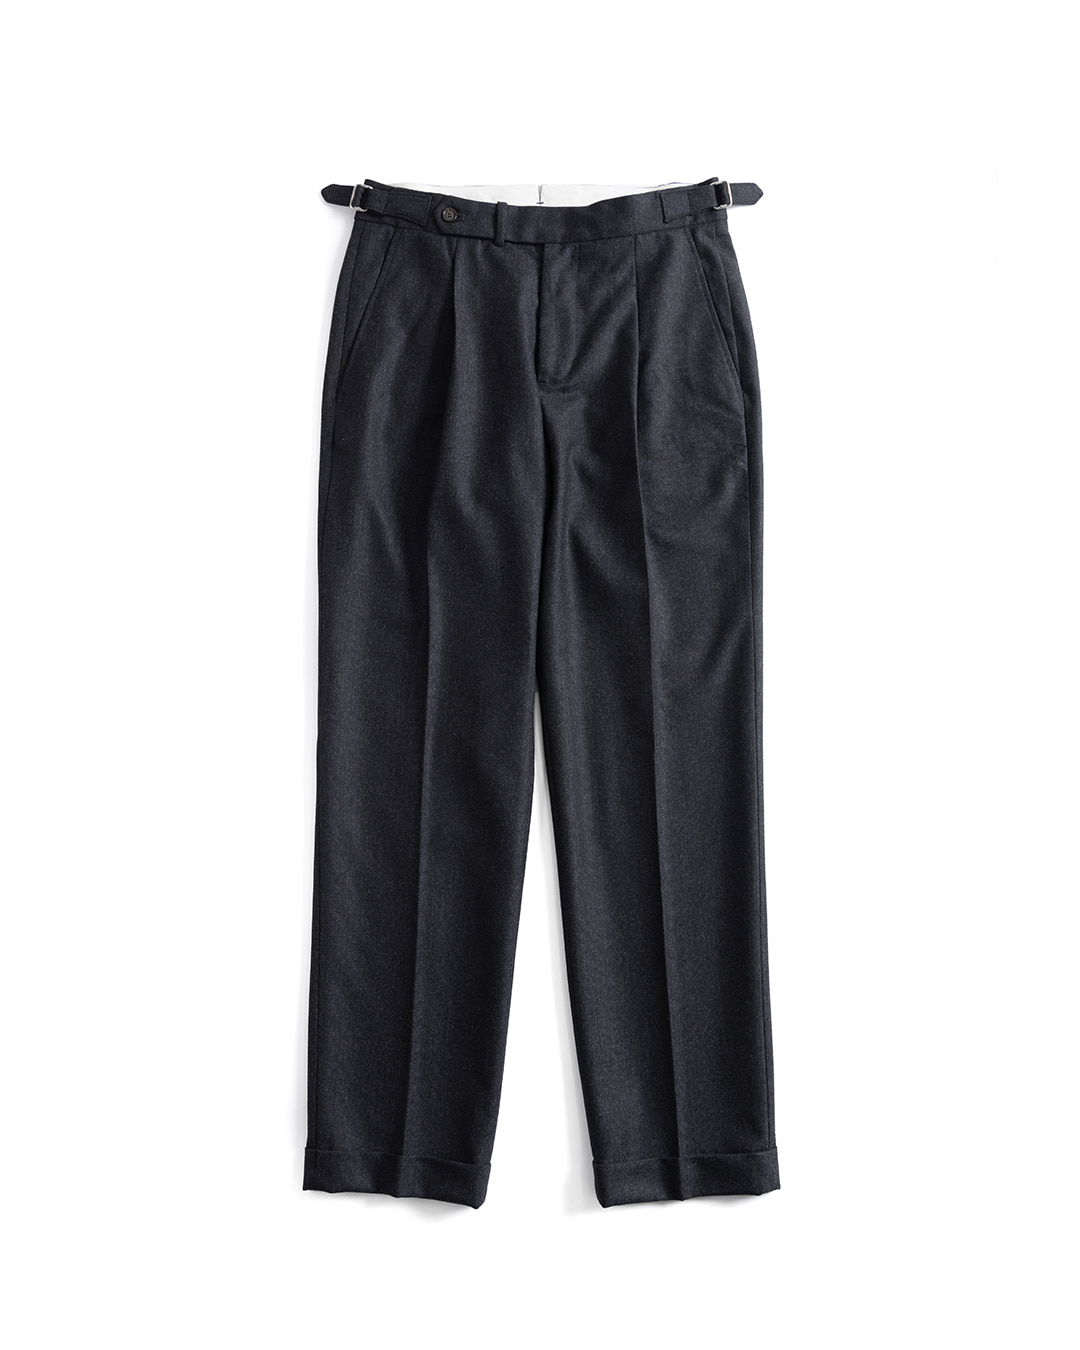 08 TAILORED FIT TROUSERS (charcoal)